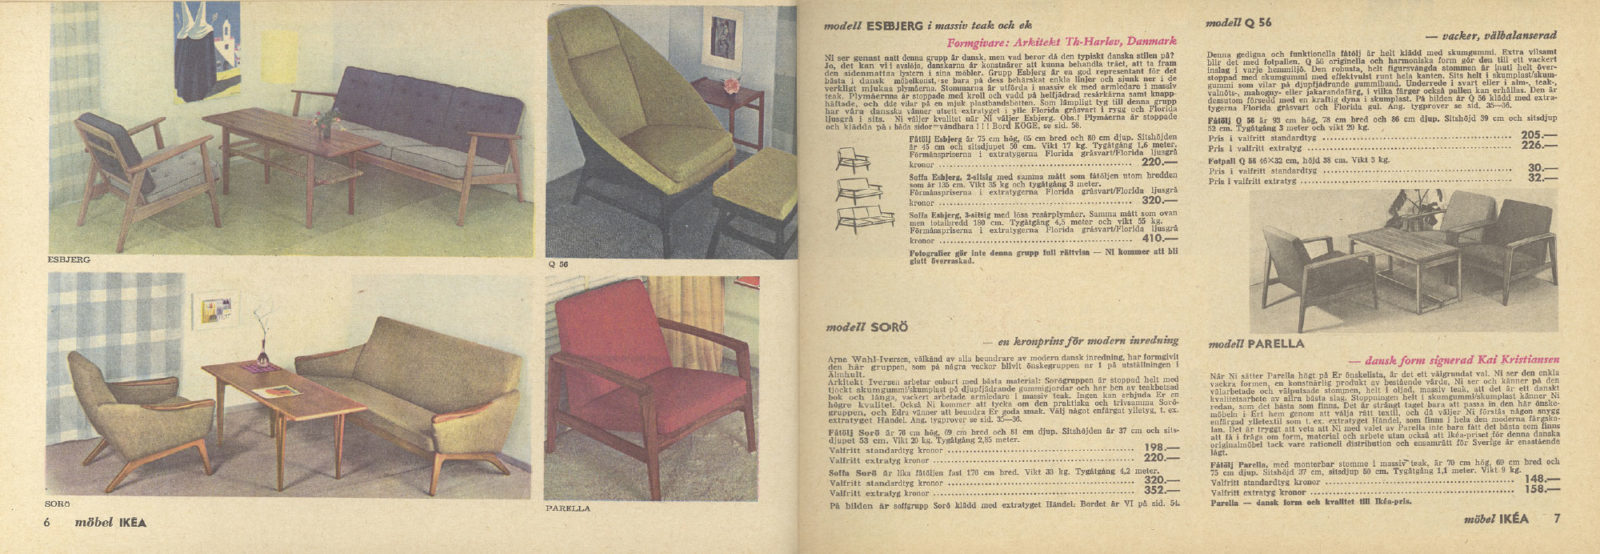 Spread in 1960 IKEA catalogue with photos of basic room interiors and, on right, descriptions of furniture.